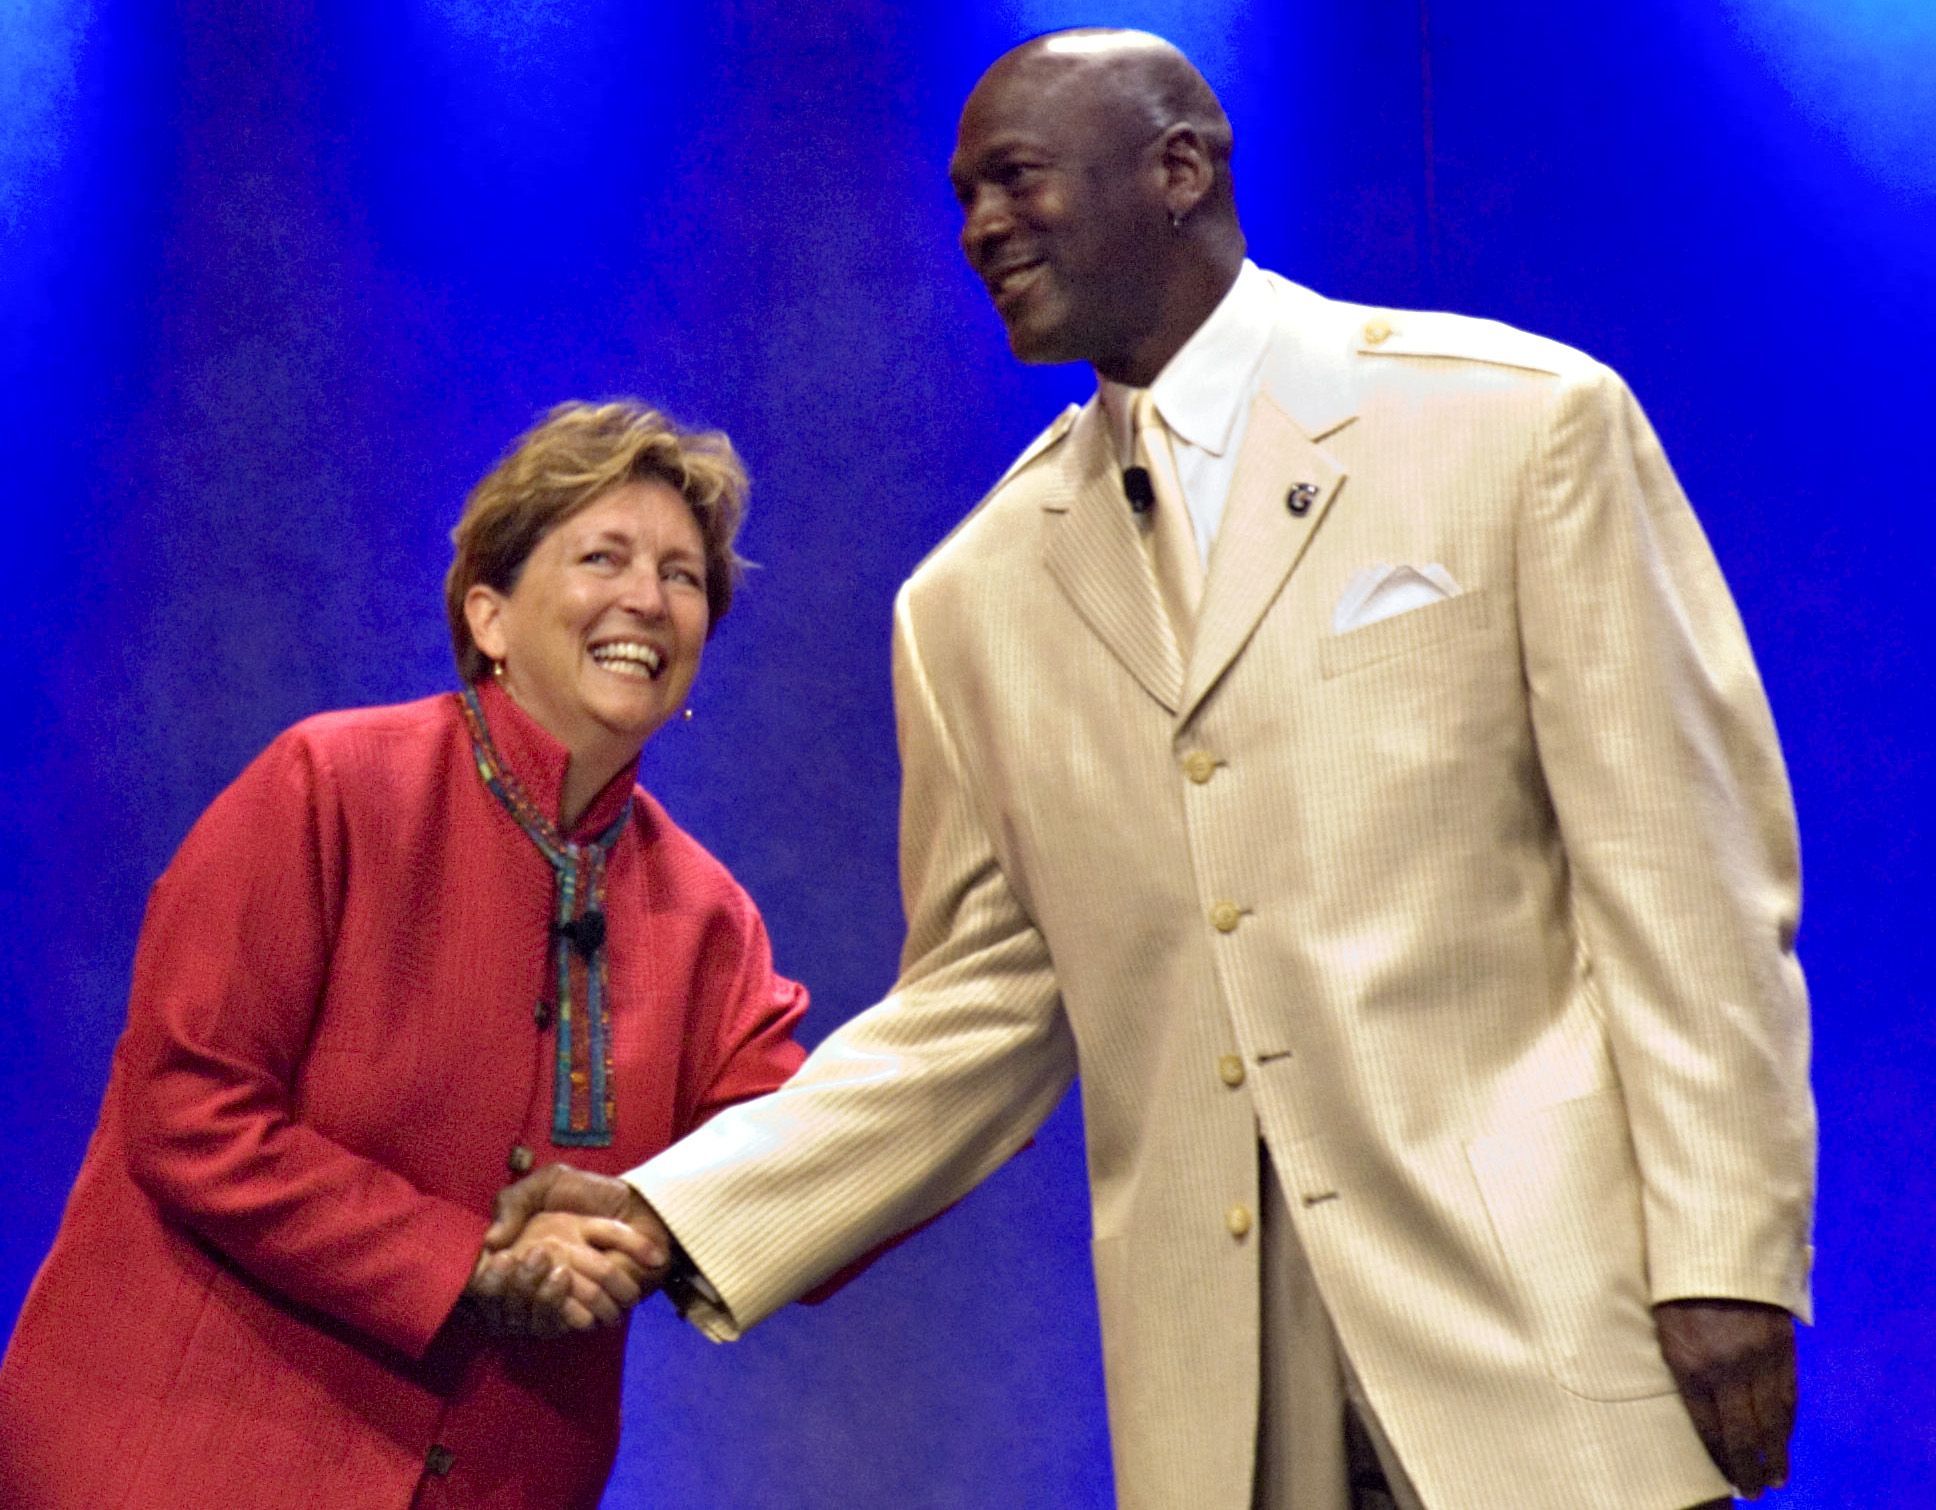 Rob Walton, executive vice president of Wal-Mart Stores Inc.'s People Division, left, greets former basketball player Michael Jordan during the annual Wal-Mart shareholders meeting in Fayetteville, Arkansas, U.S.